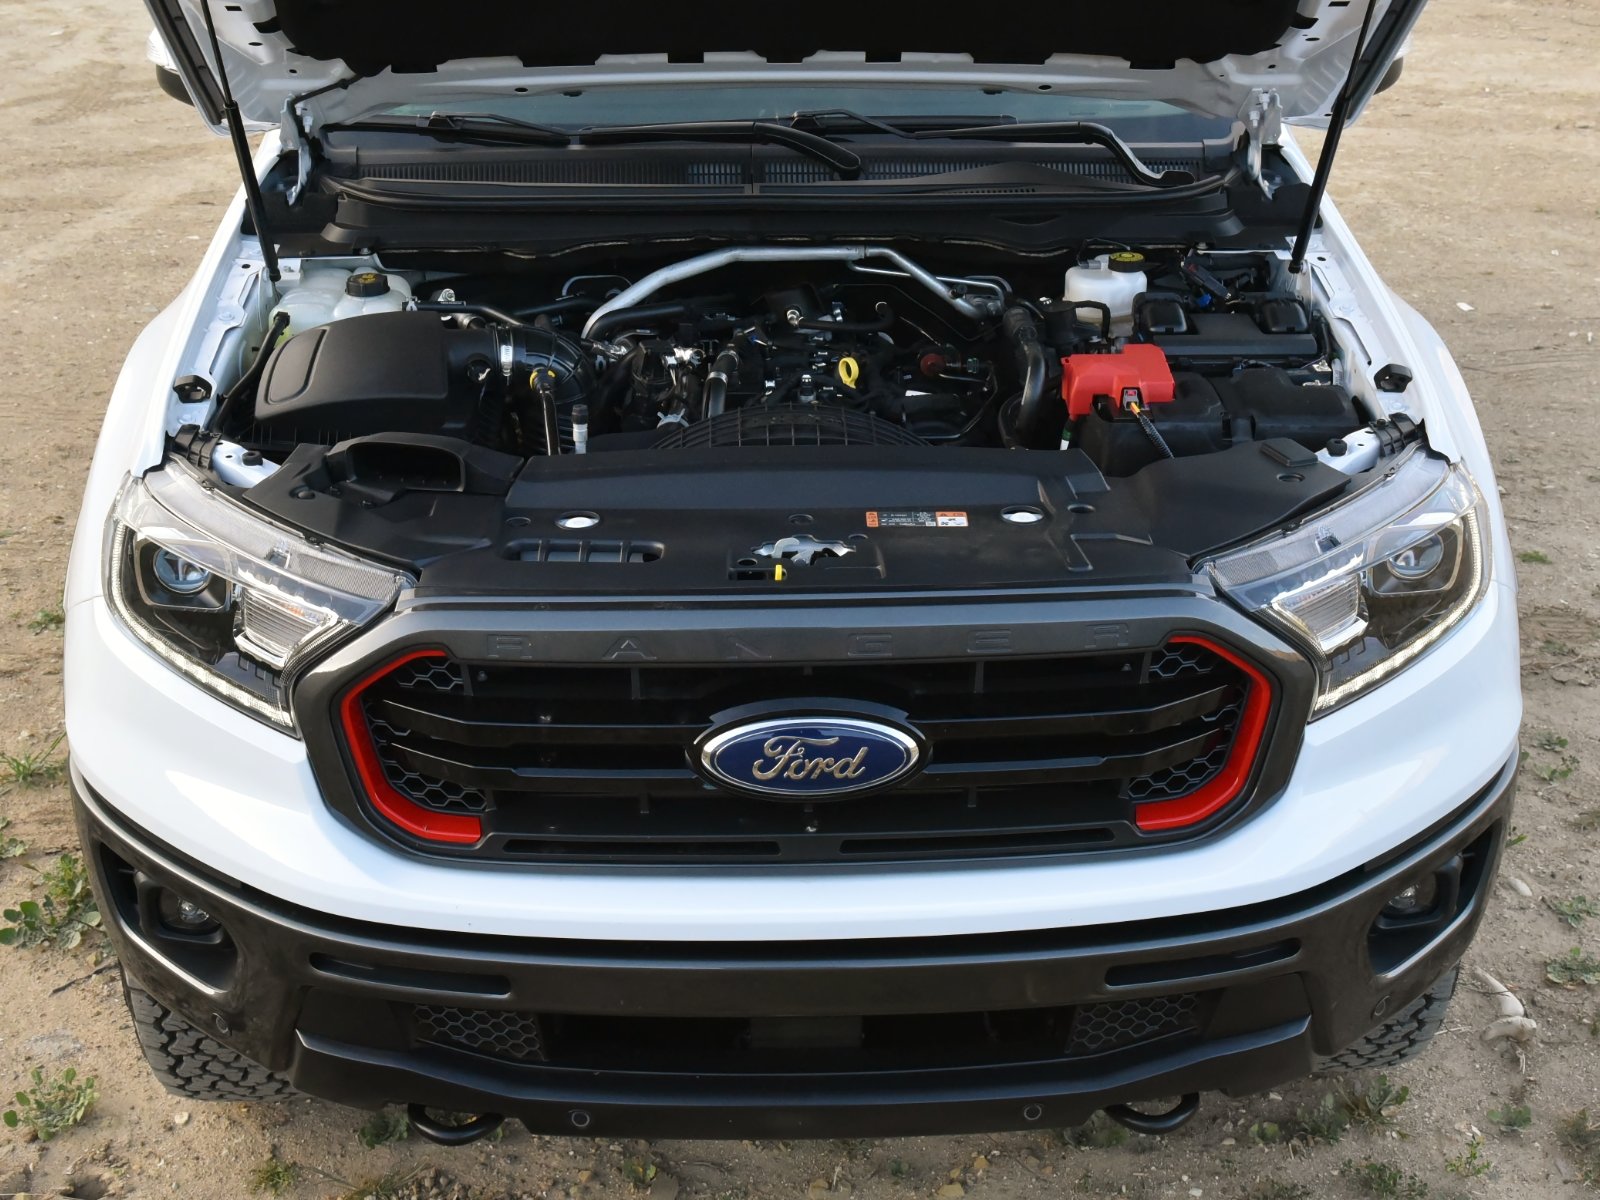 2021 Ford Ranger Test Drive Review